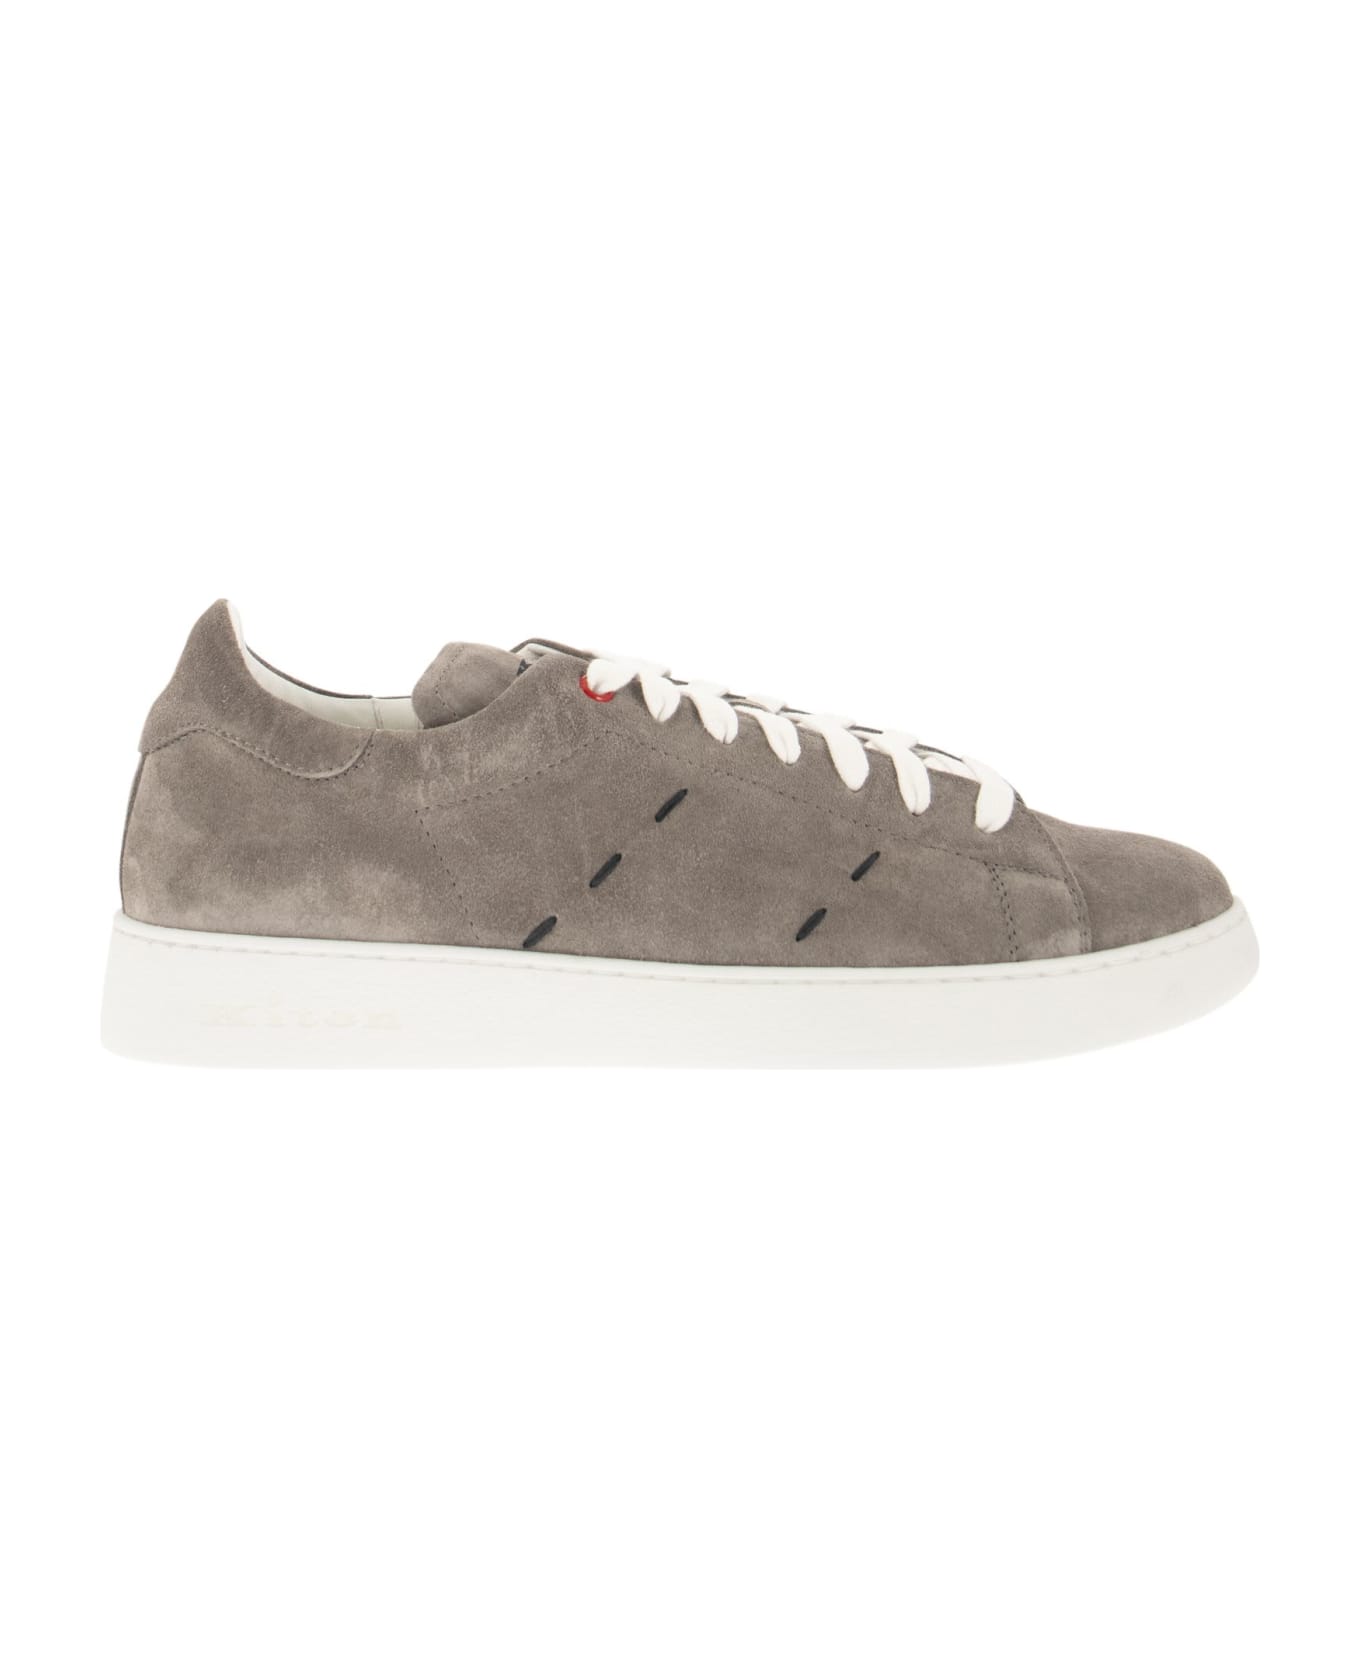 Kiton Suede Sneakers | italist